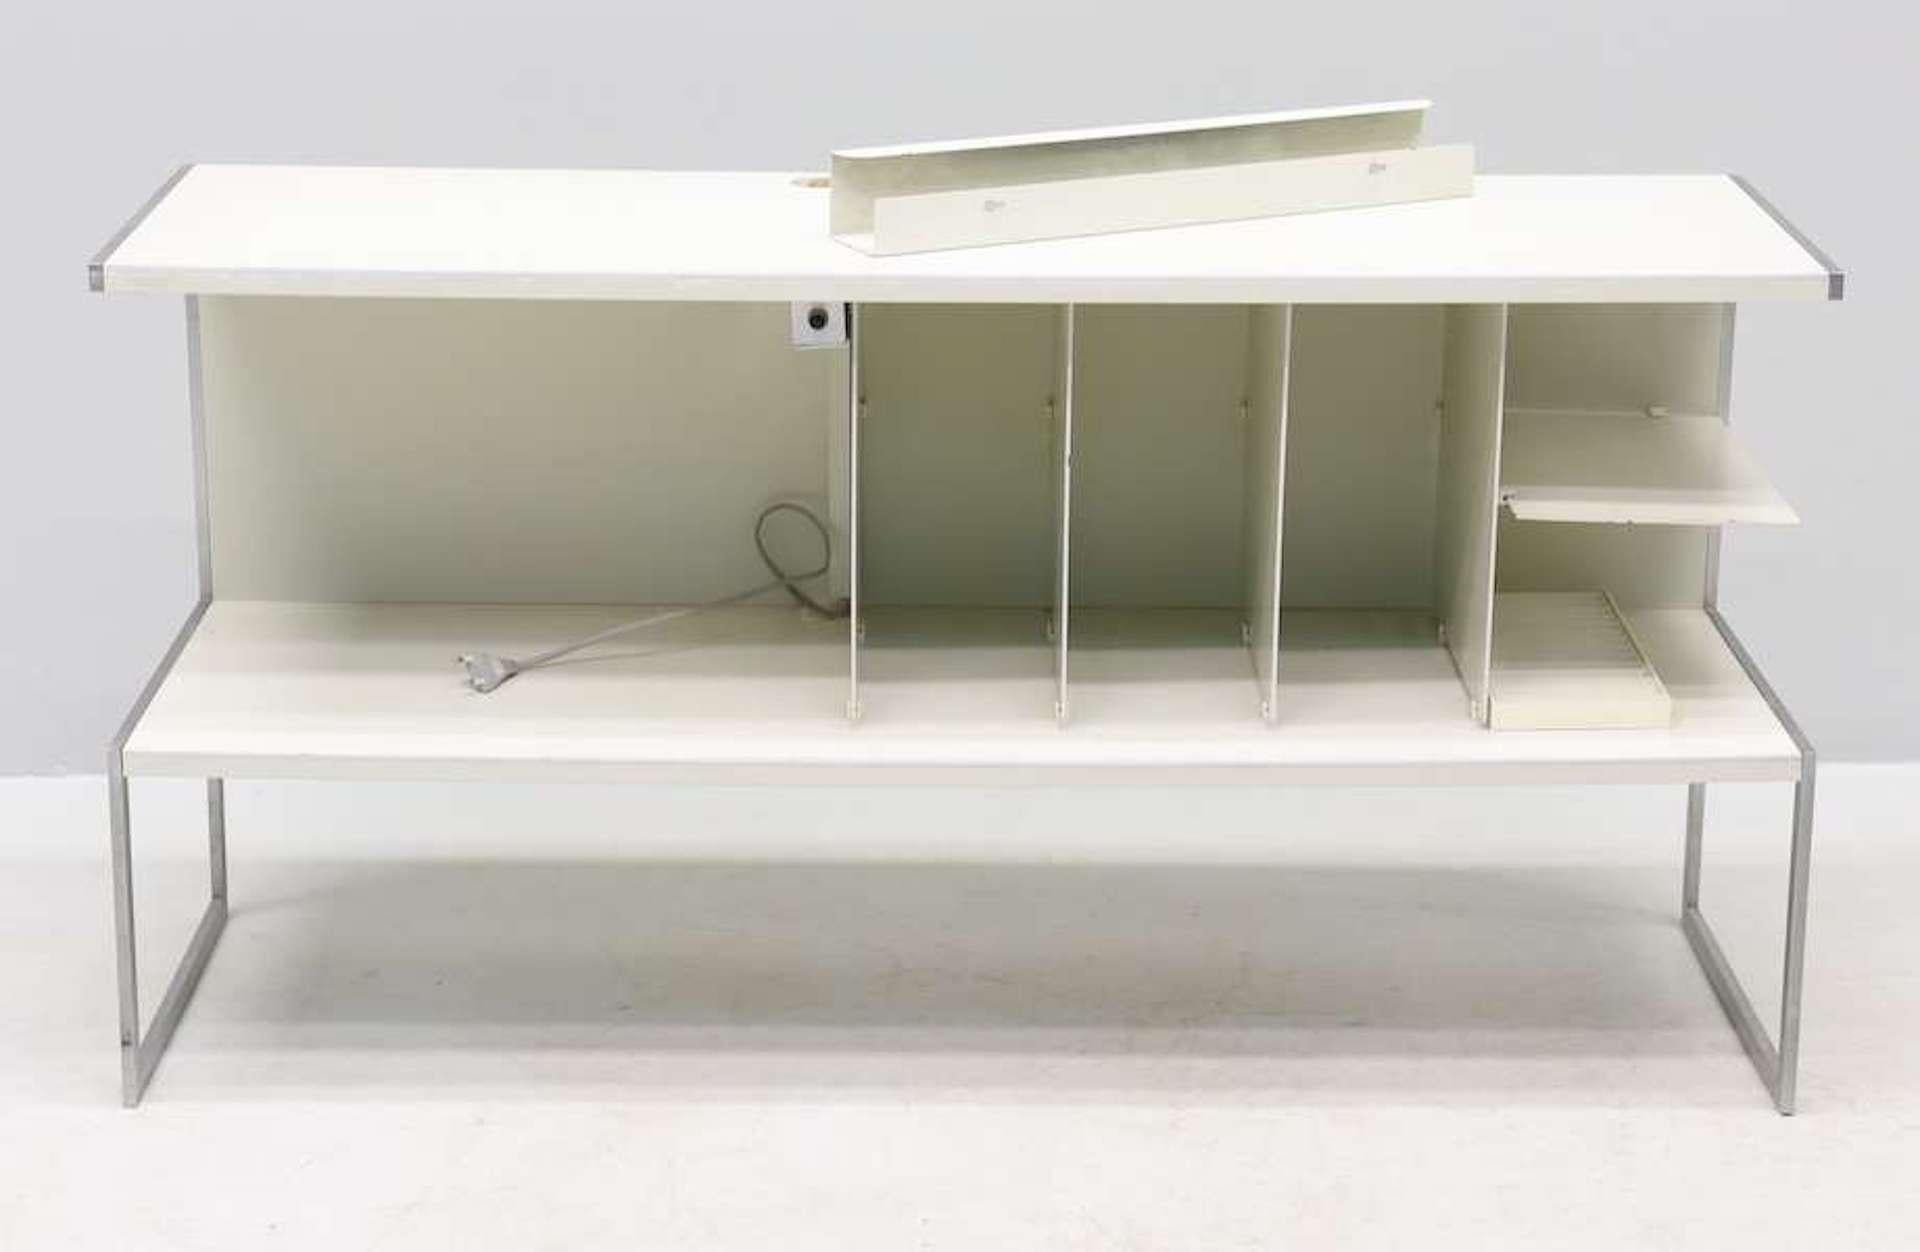 Absolutely rare system cabinet / audio cabinet in white combined with stainless steel stands and details designed by Jacob Jensen for Bang & Olufsen in Denmark Type: 2064 Model: SC50. 
It's a great system cabinet / audio cabinet to display your